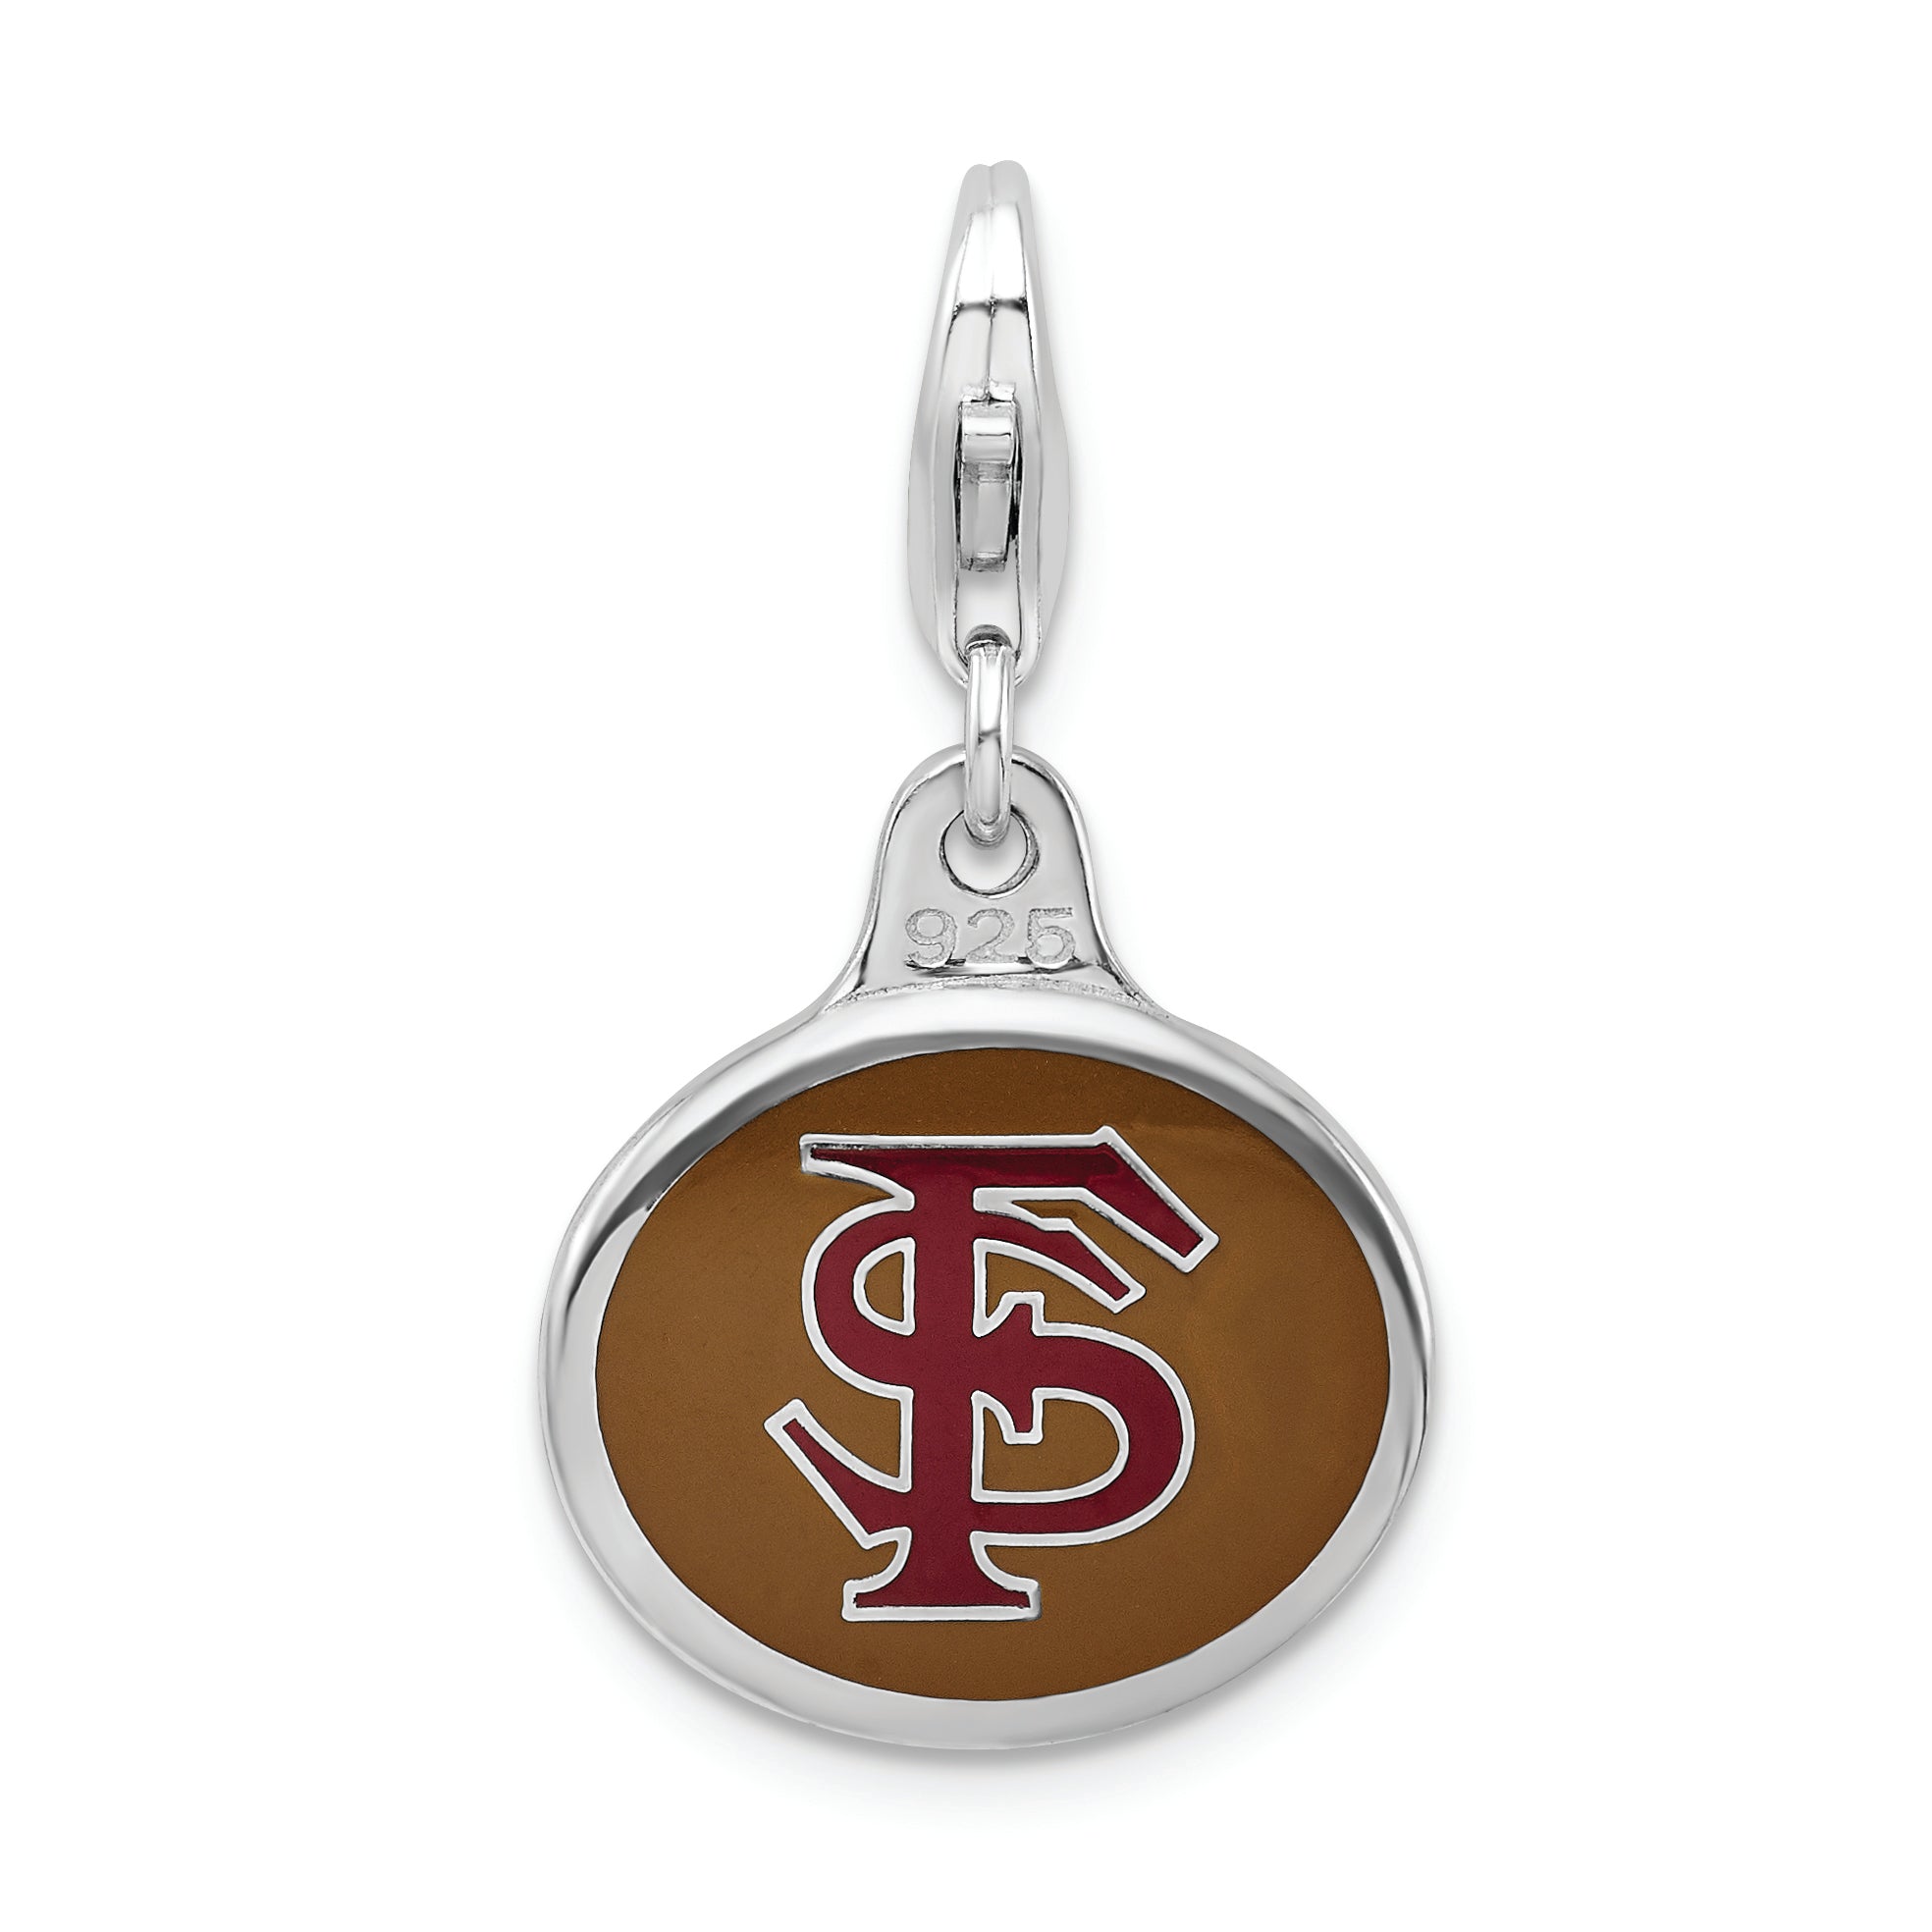 Amore La Vita Sterling Silver Rhodium-plated Polished Enameled Florida State University Charm with Fancy Lobster Clasp